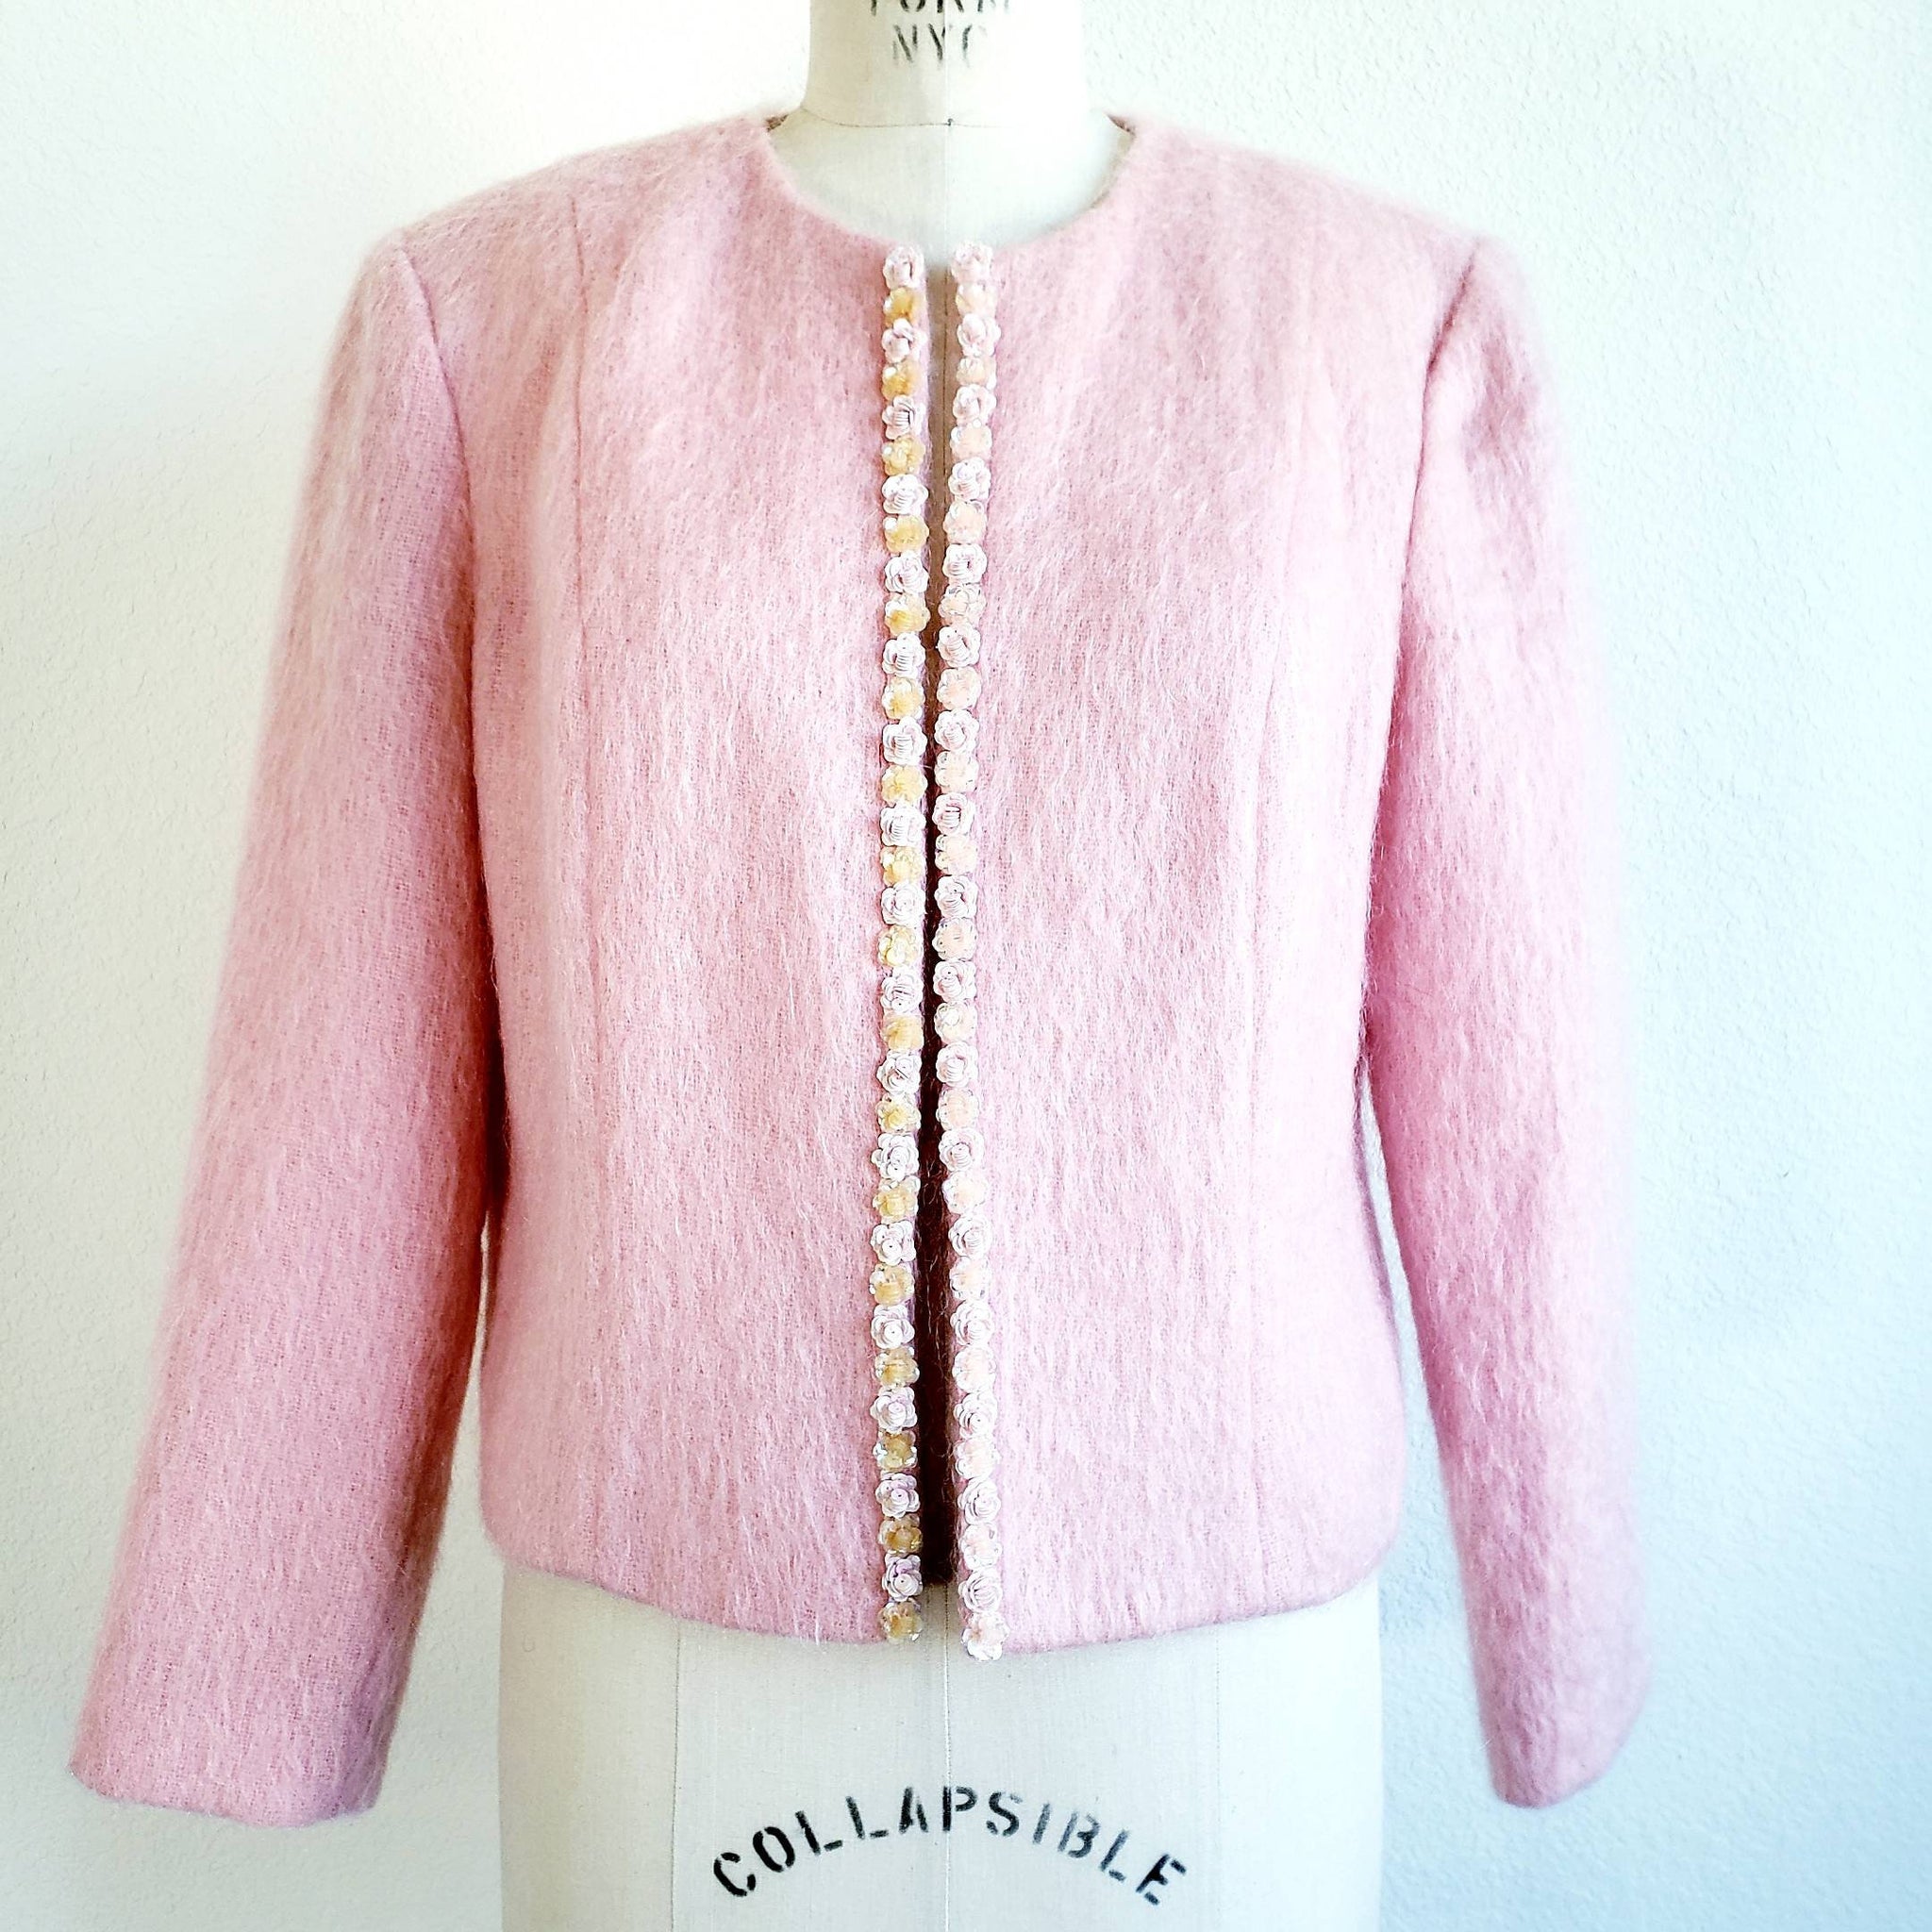 Vintage 80s/90s Pink Mohair Cardigan/Blazer with Sequins